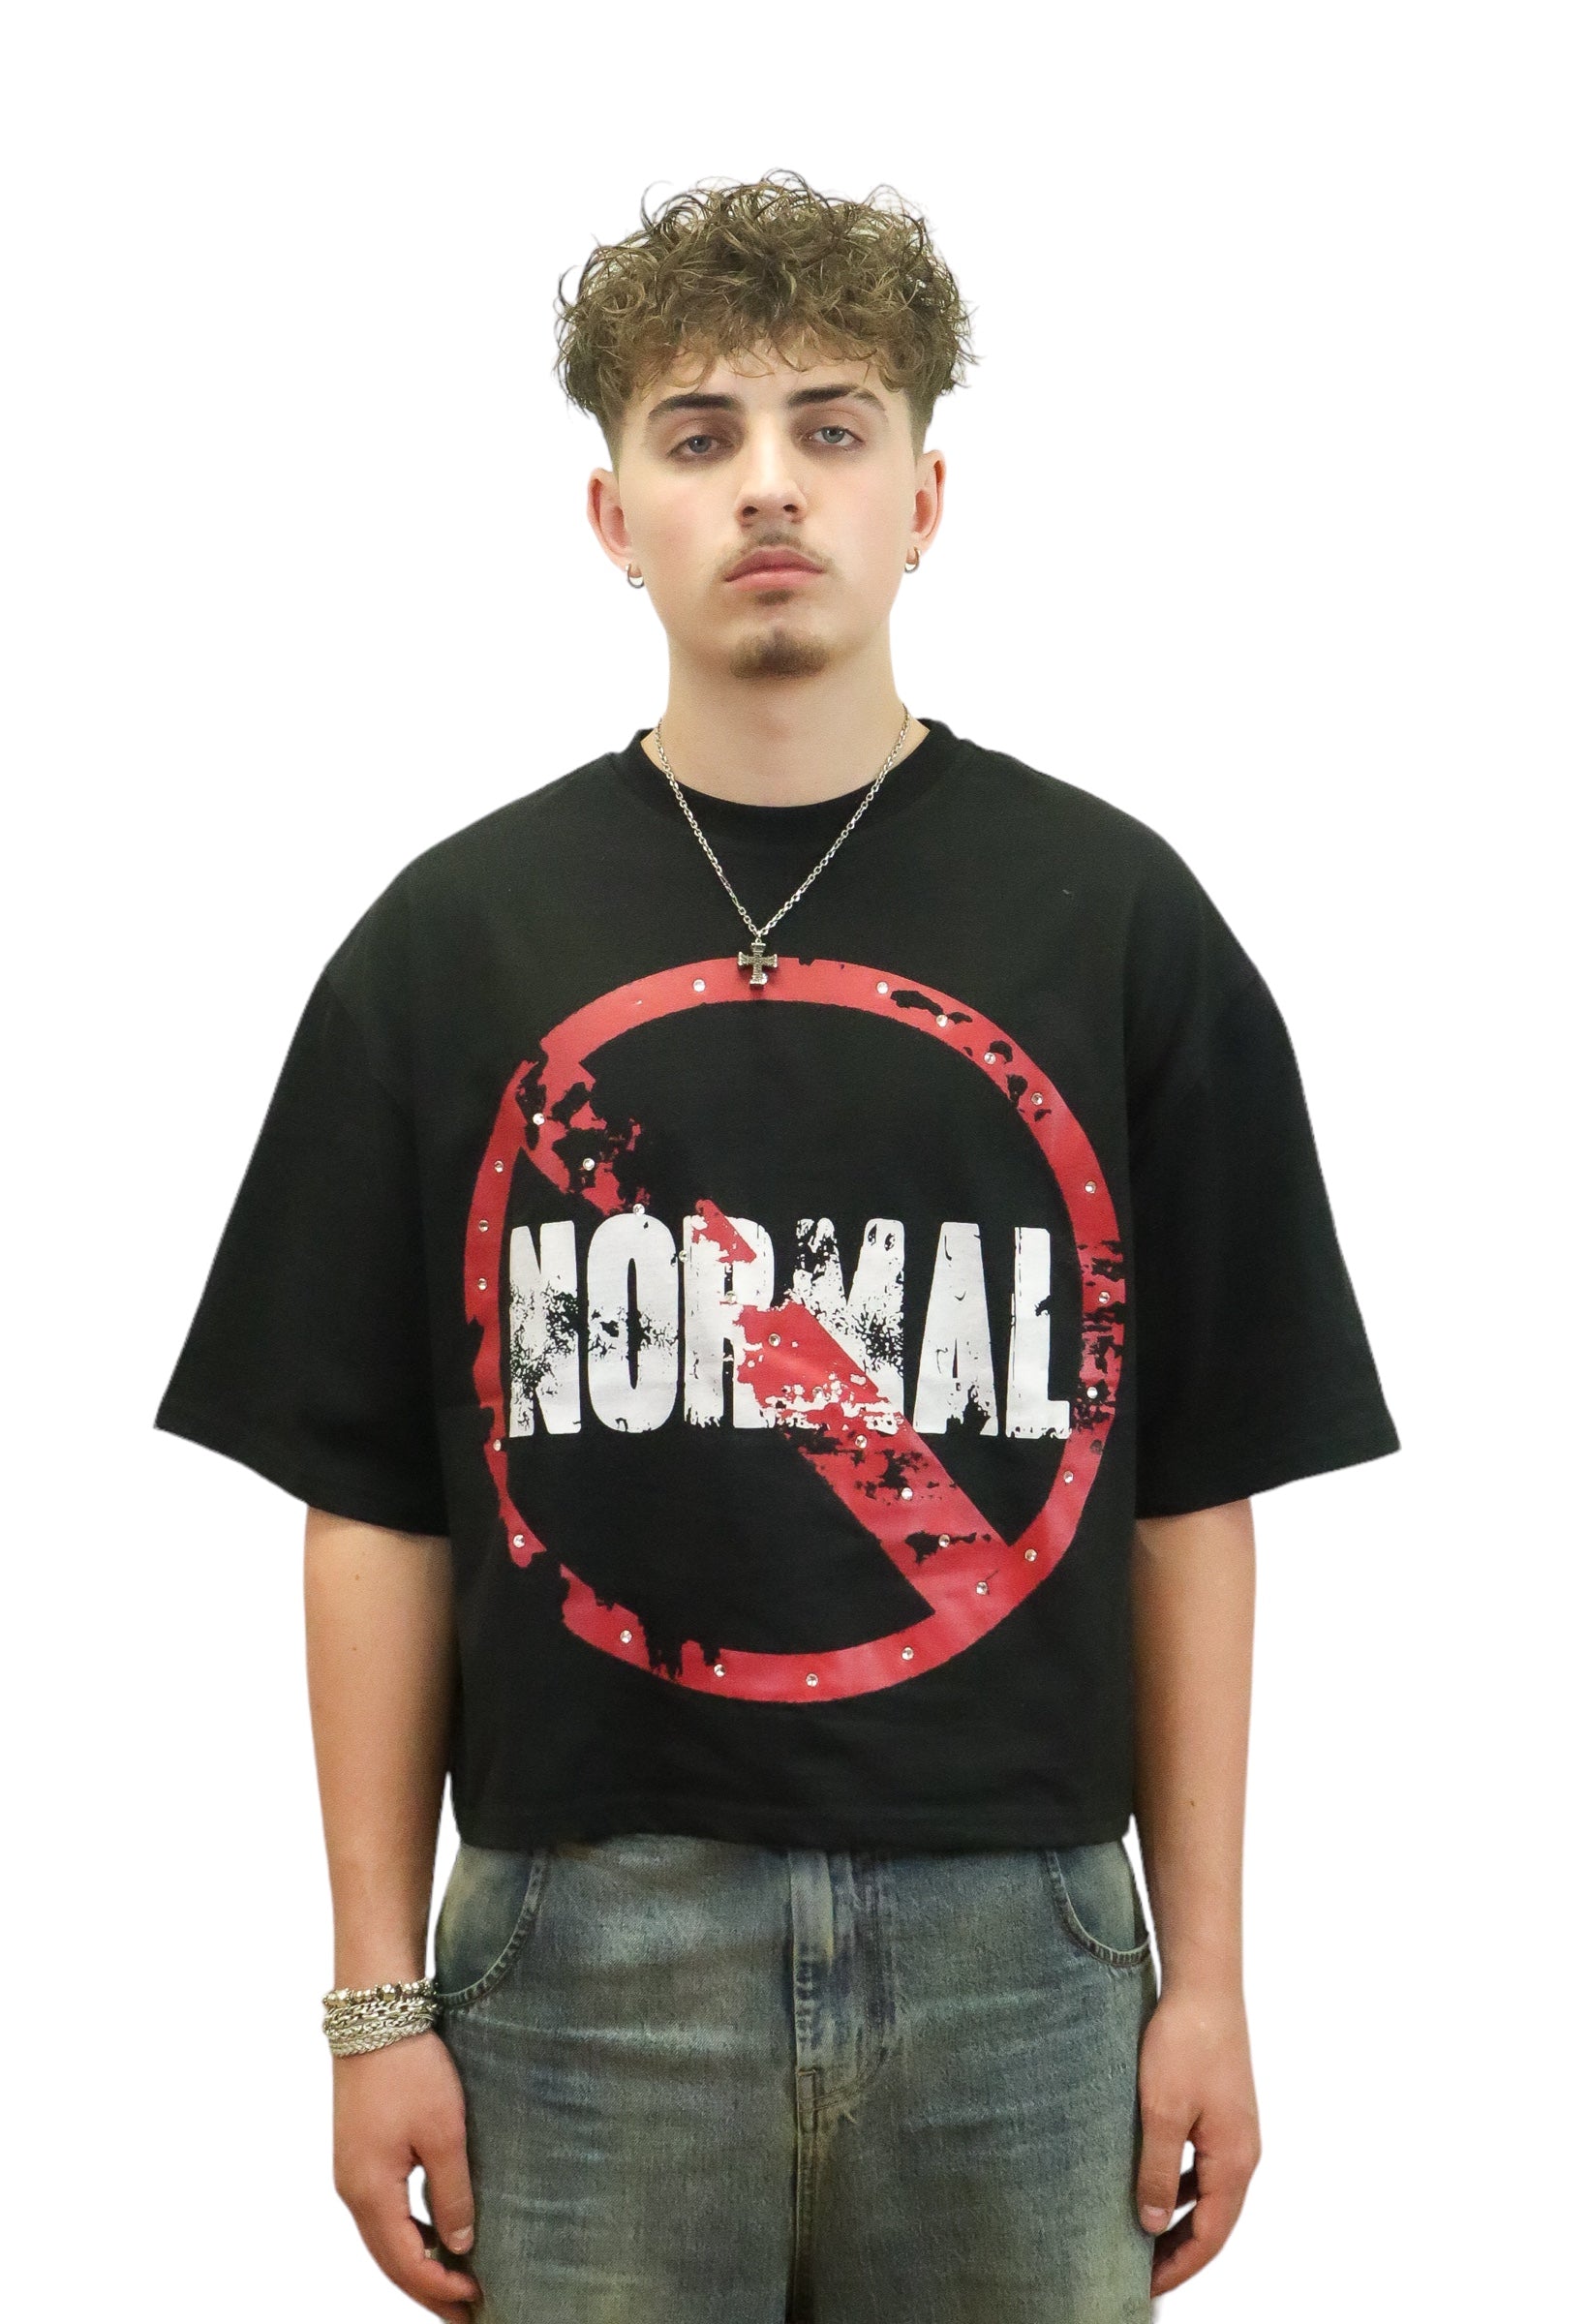 Normal cropped tee